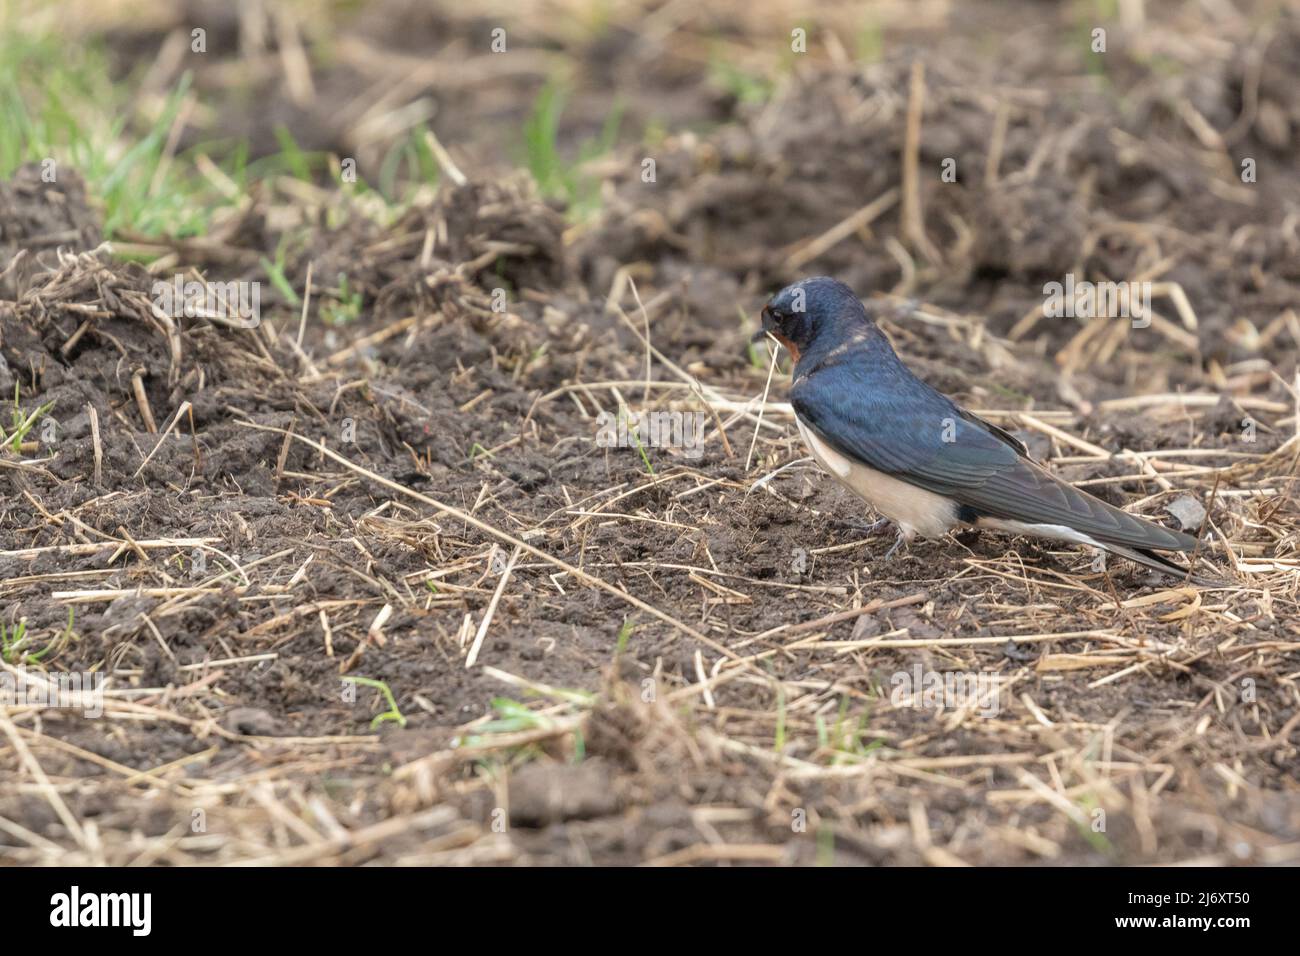 A barn swallow (UK summer visitor) collecting nesting material from outside stables in Yorkshire, England. Stock Photo